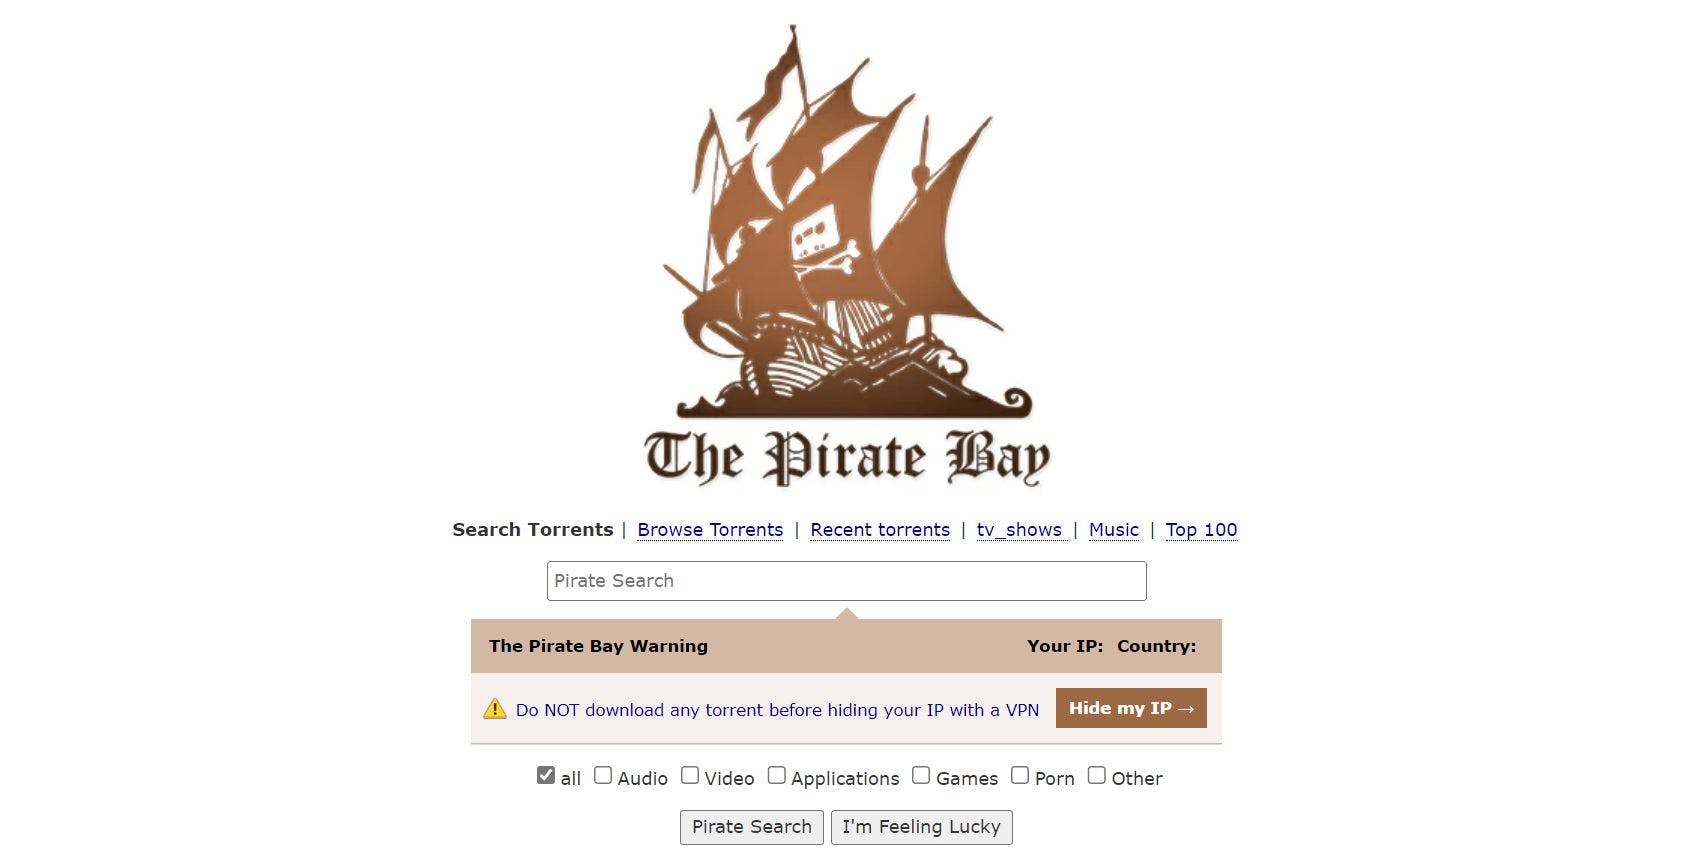 How The Pirate Bay Almost Bought a Country 